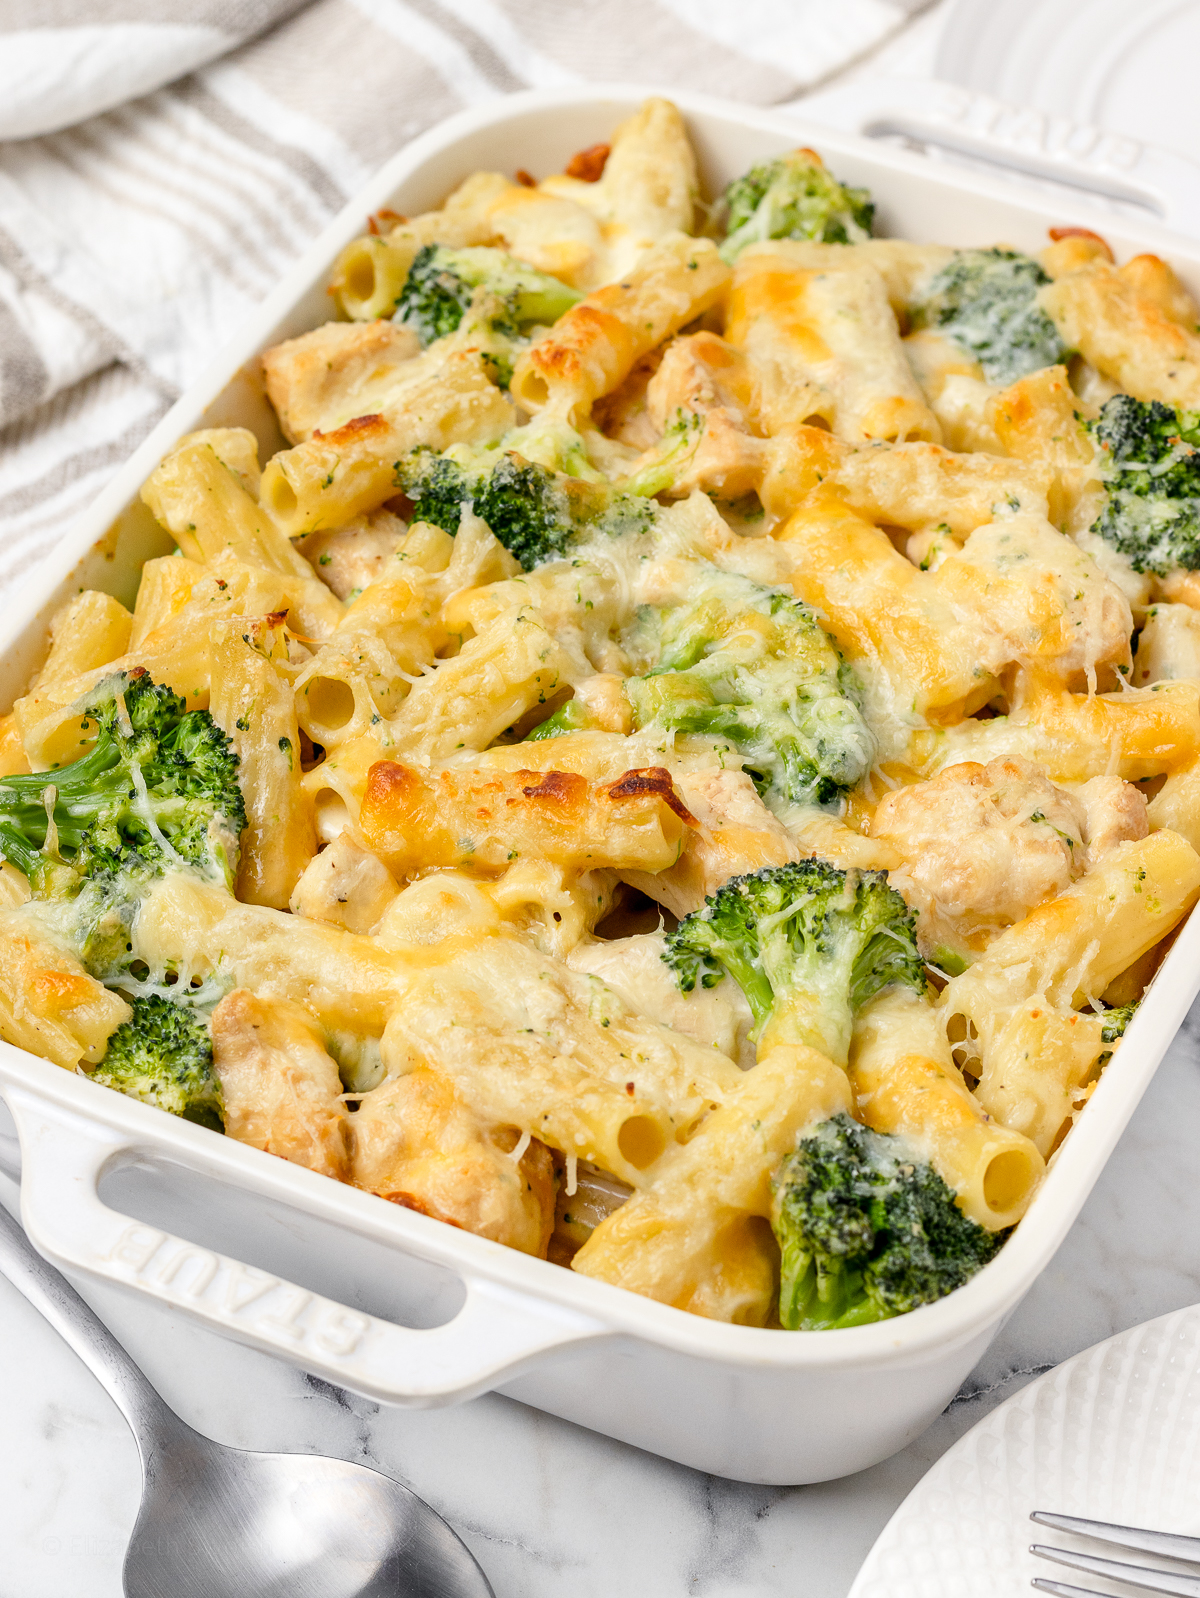 A large pan of Baked Chicken and Broccoli Pasta ready to eat.